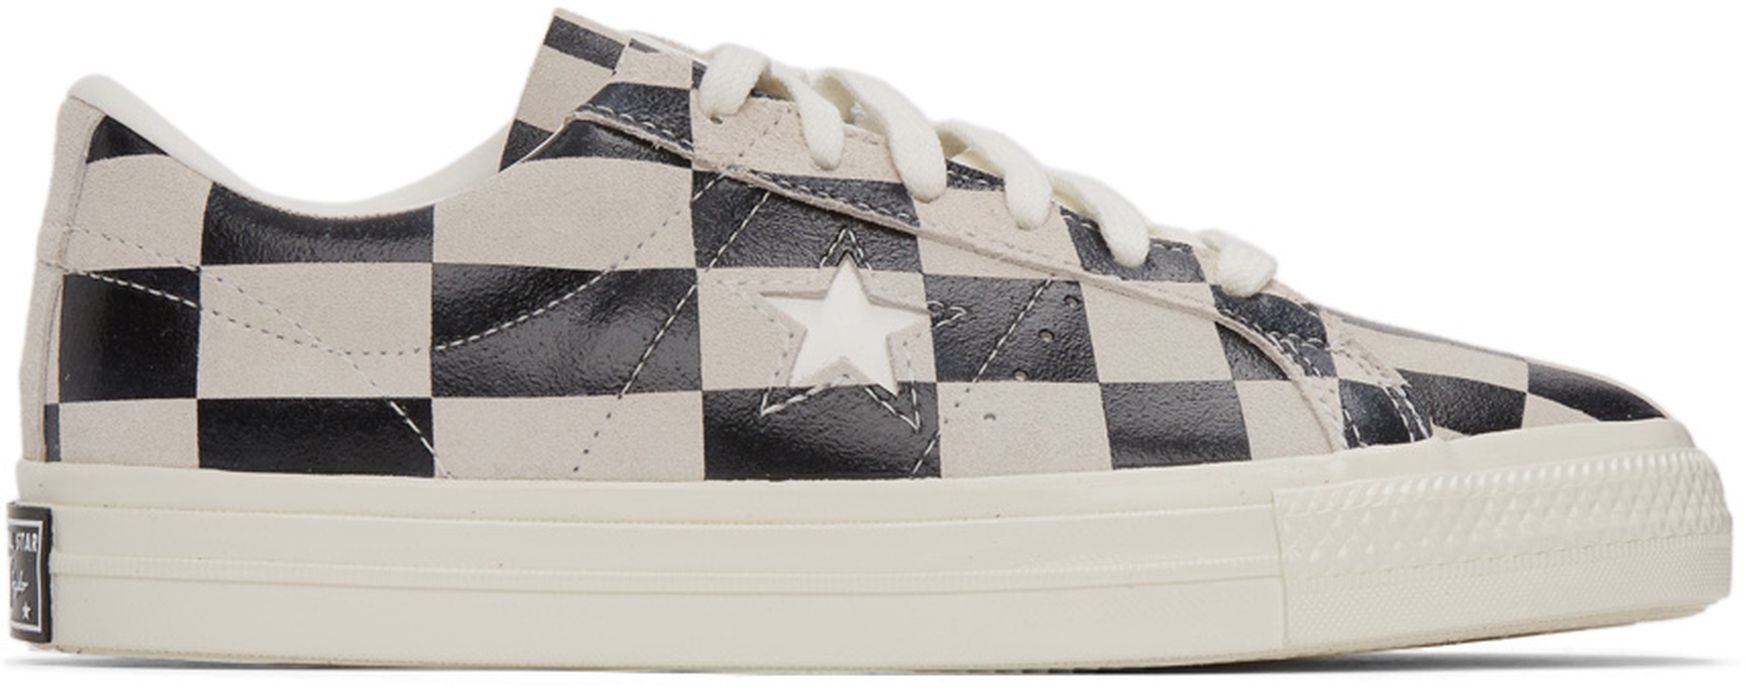 Converse Black & White Check One Star Sneakers